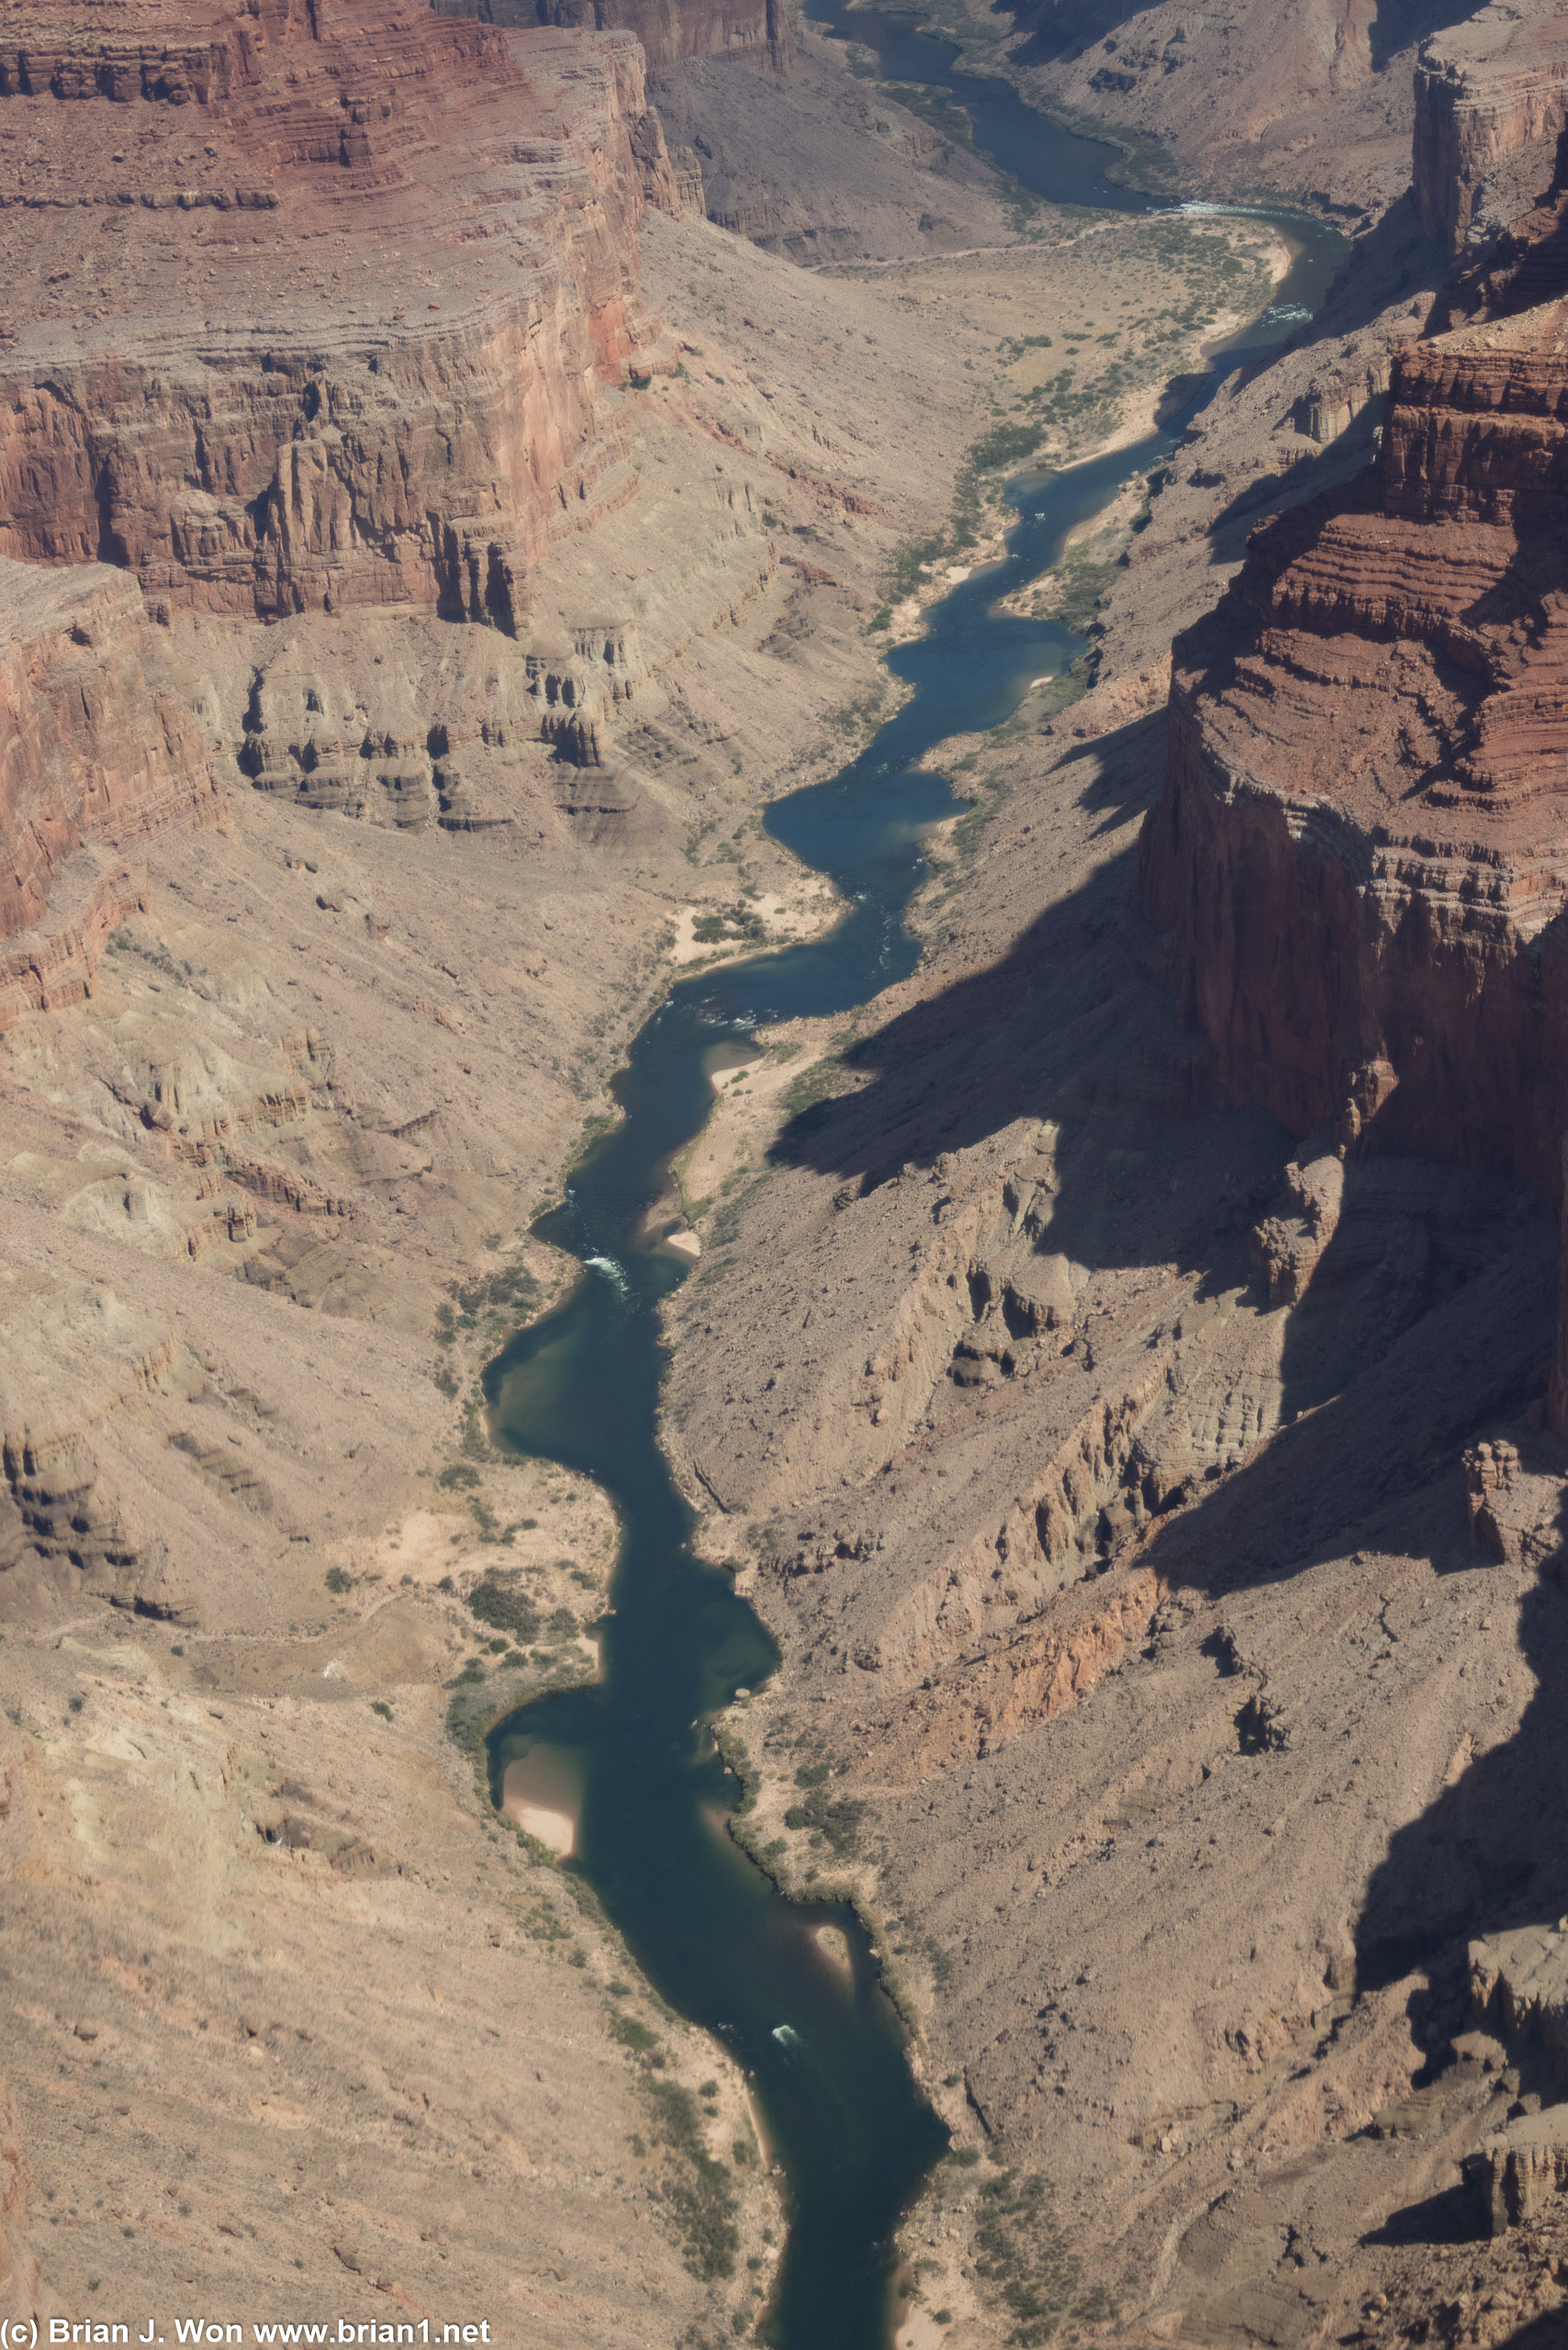 The Colorado River winds north/south in this part of the canyon.